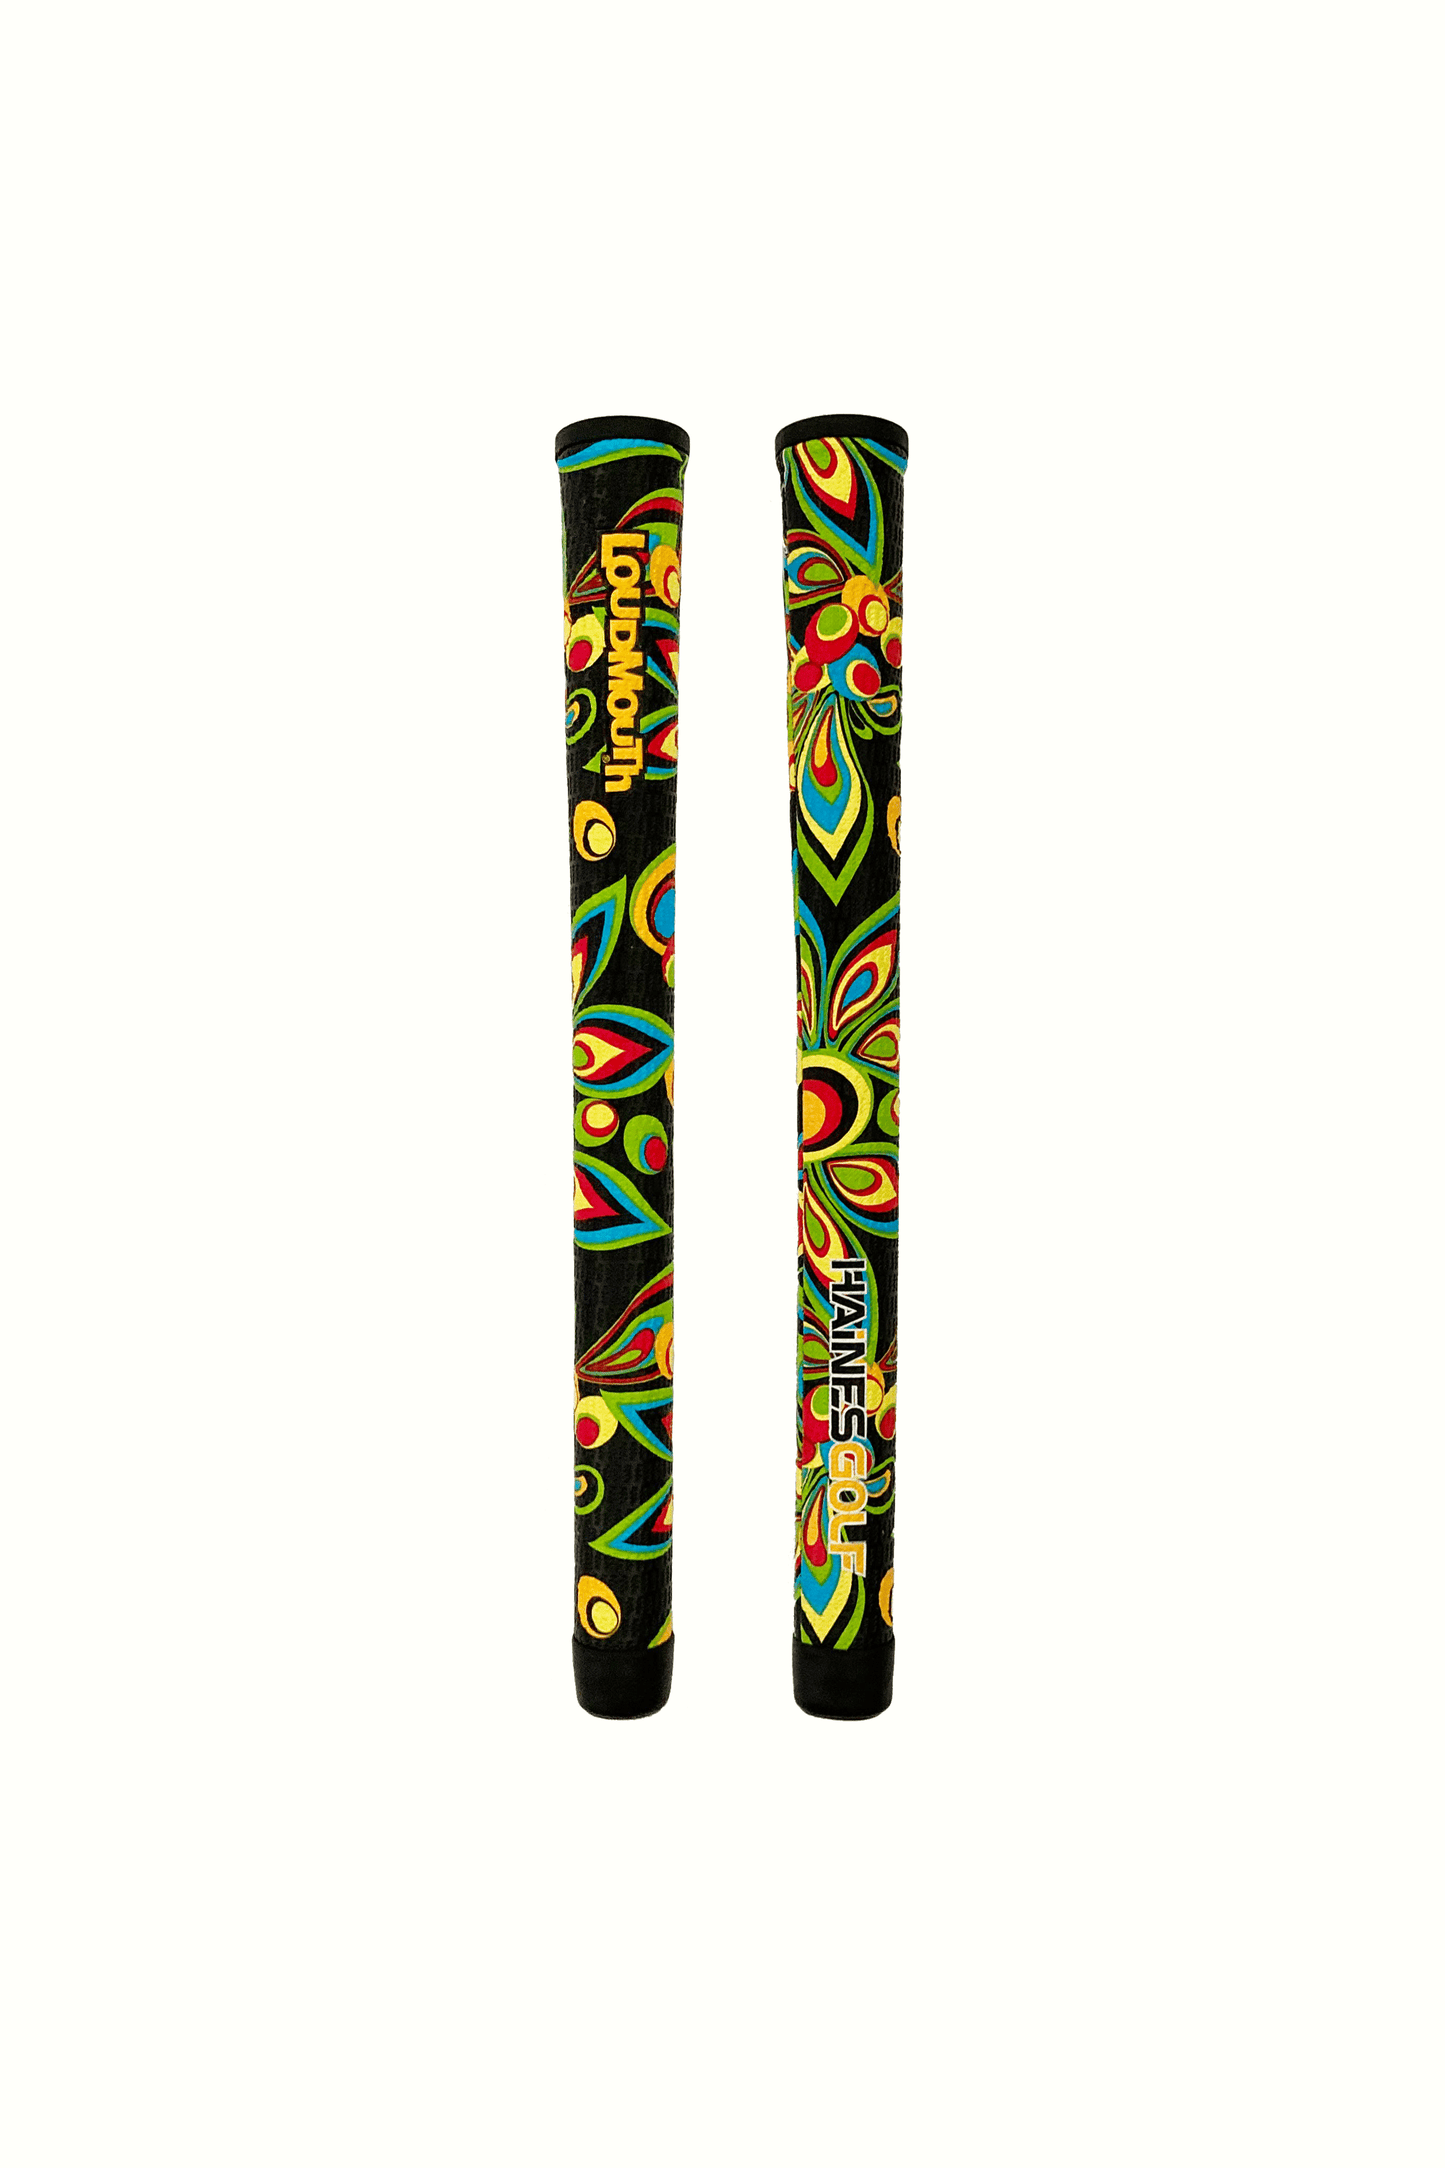 two swing grips with the Loudmouth logo and shagadelic print